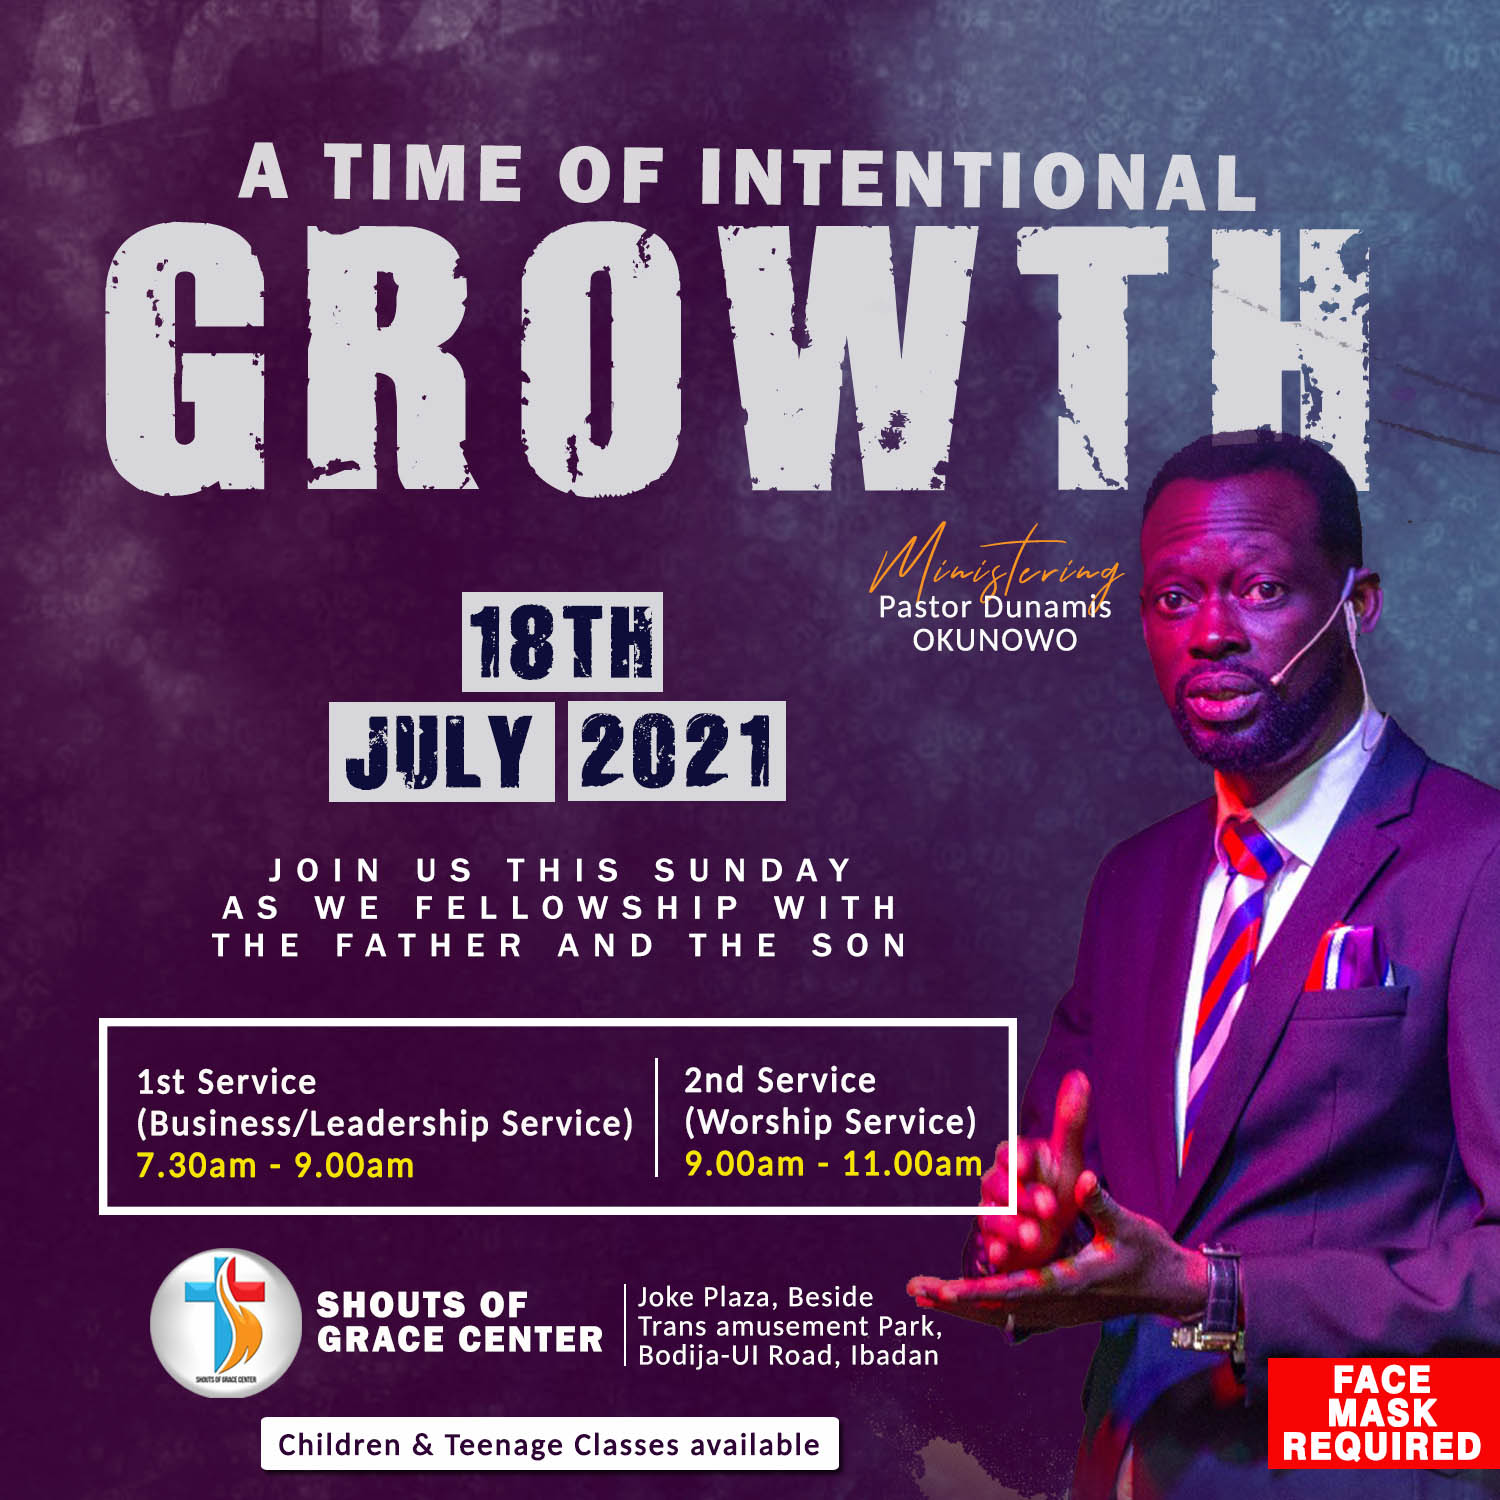 Presenting Your Body As A Living Sacrifice By Pastor Dunamis (18th July 2021)